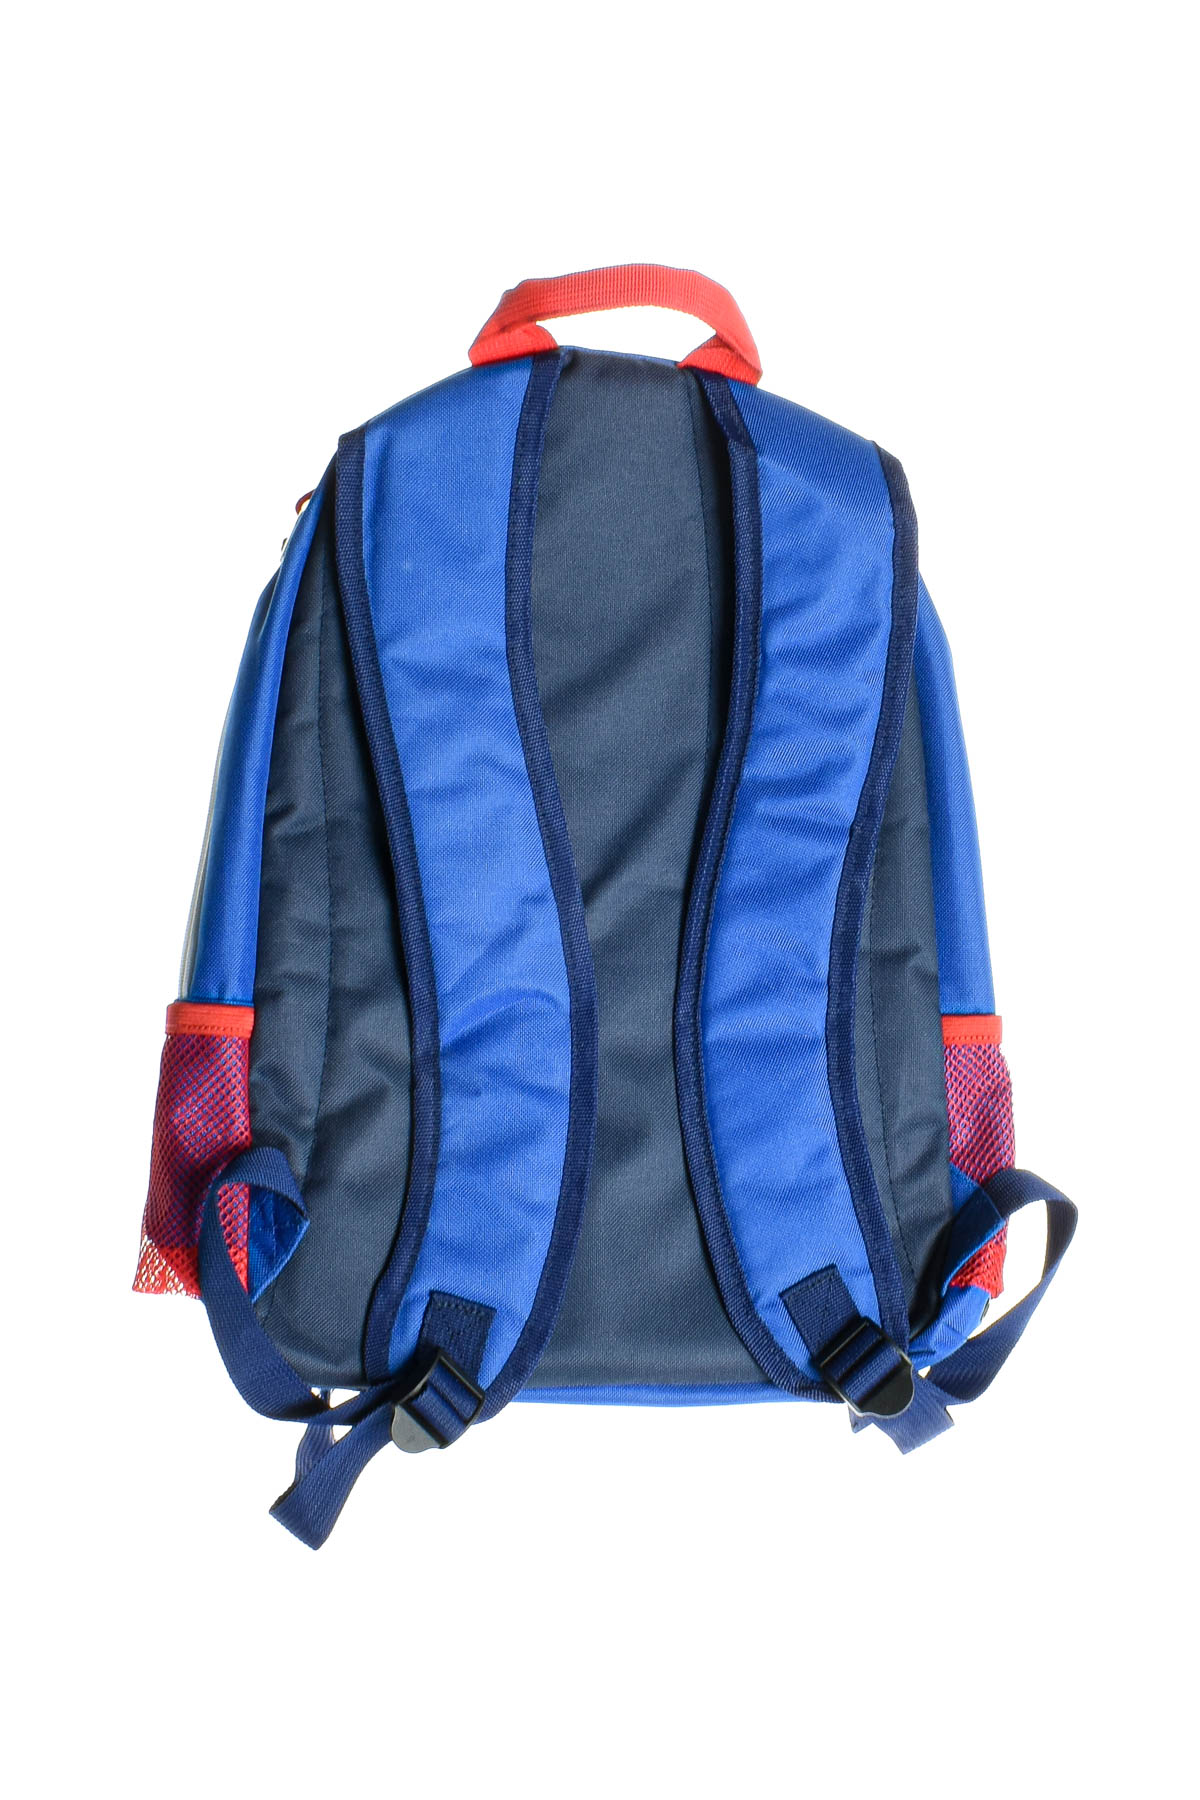 Backpack - FORCH - 1